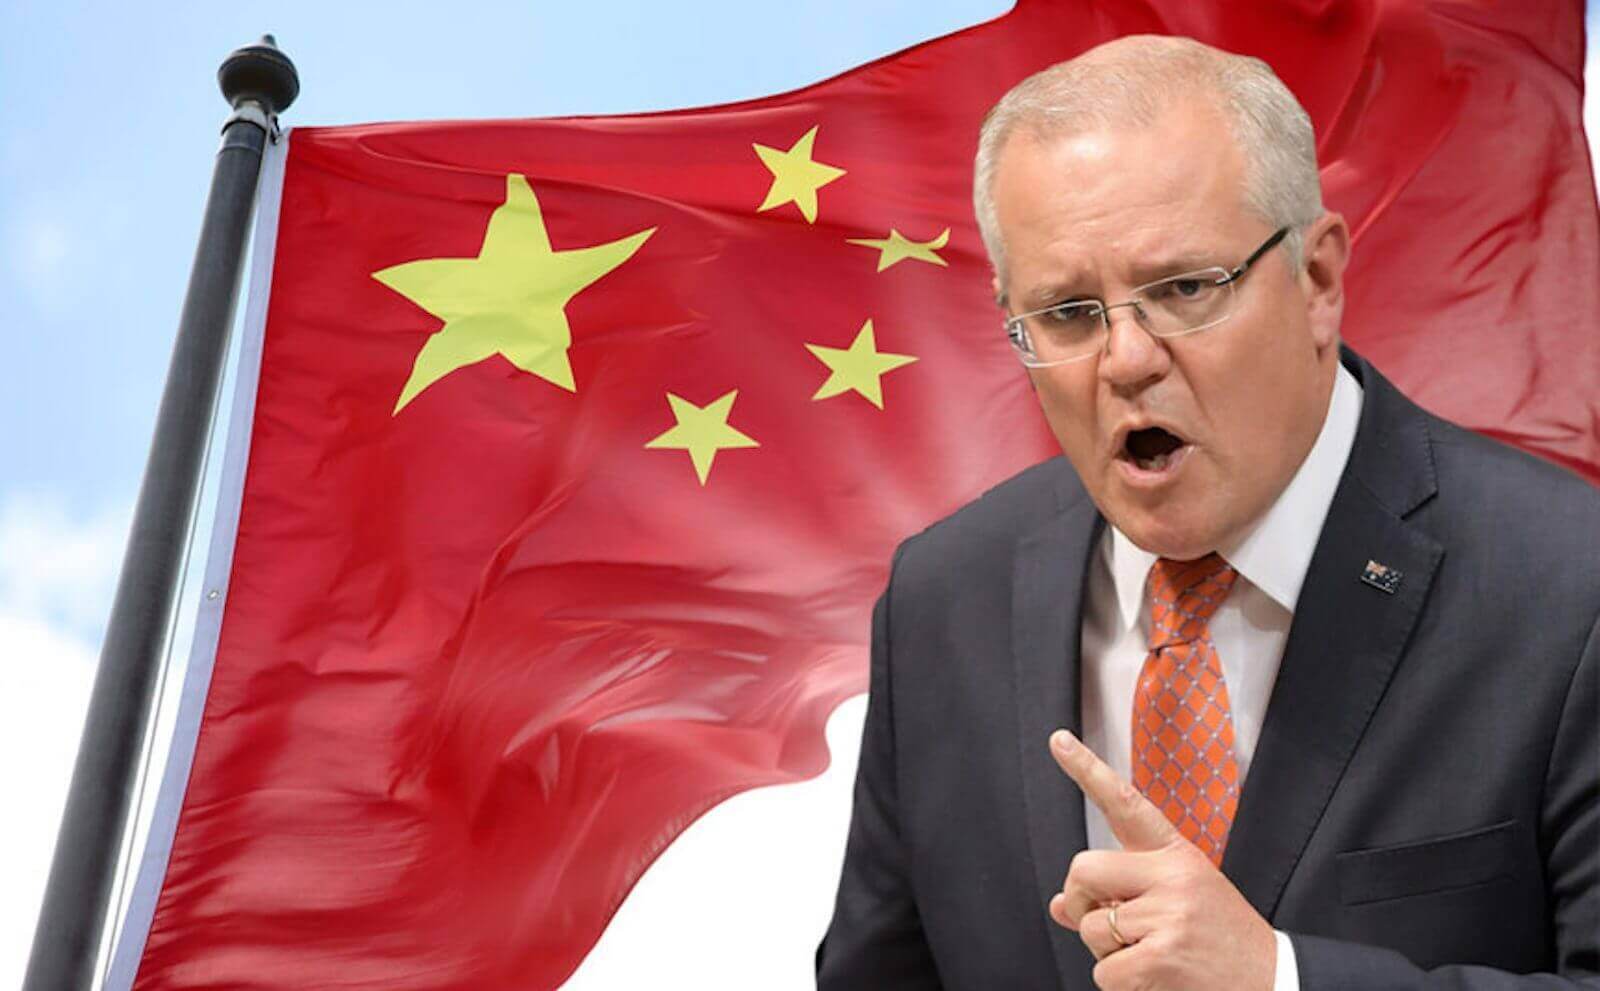 China Rejects Australian PM’s Demand for Apology Over Tweet of Doctored Image of Soldier